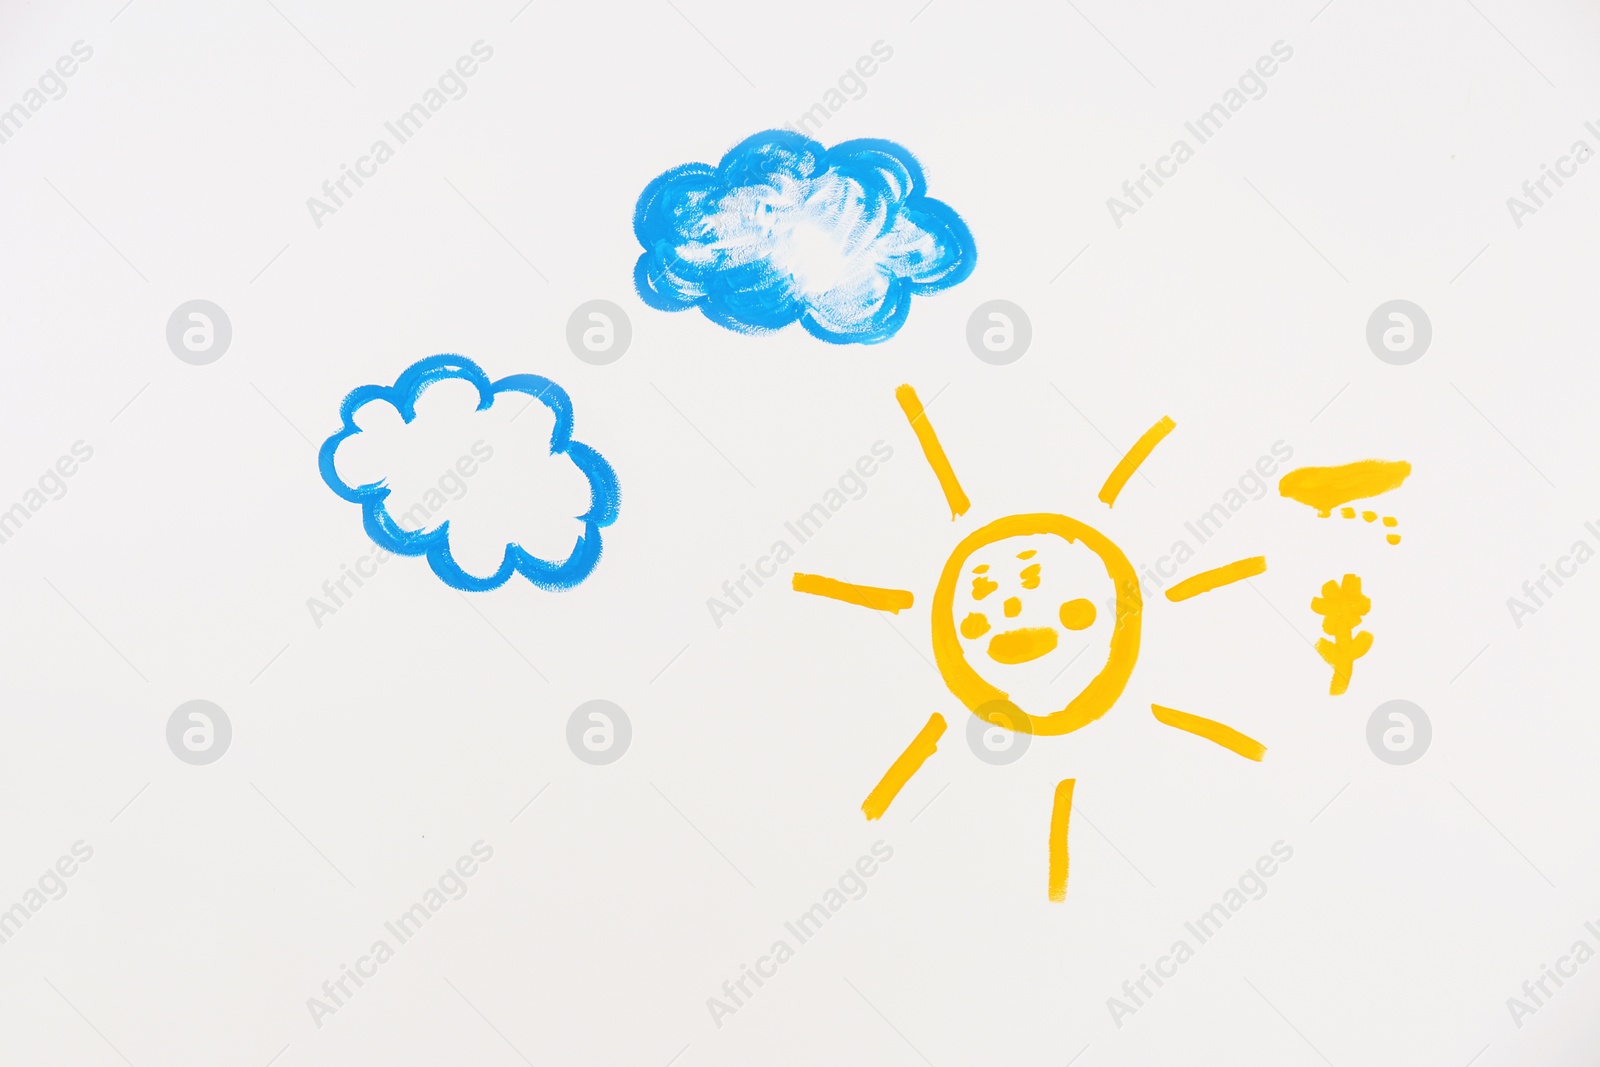 Photo of Children's paintings of sun and clouds on white background